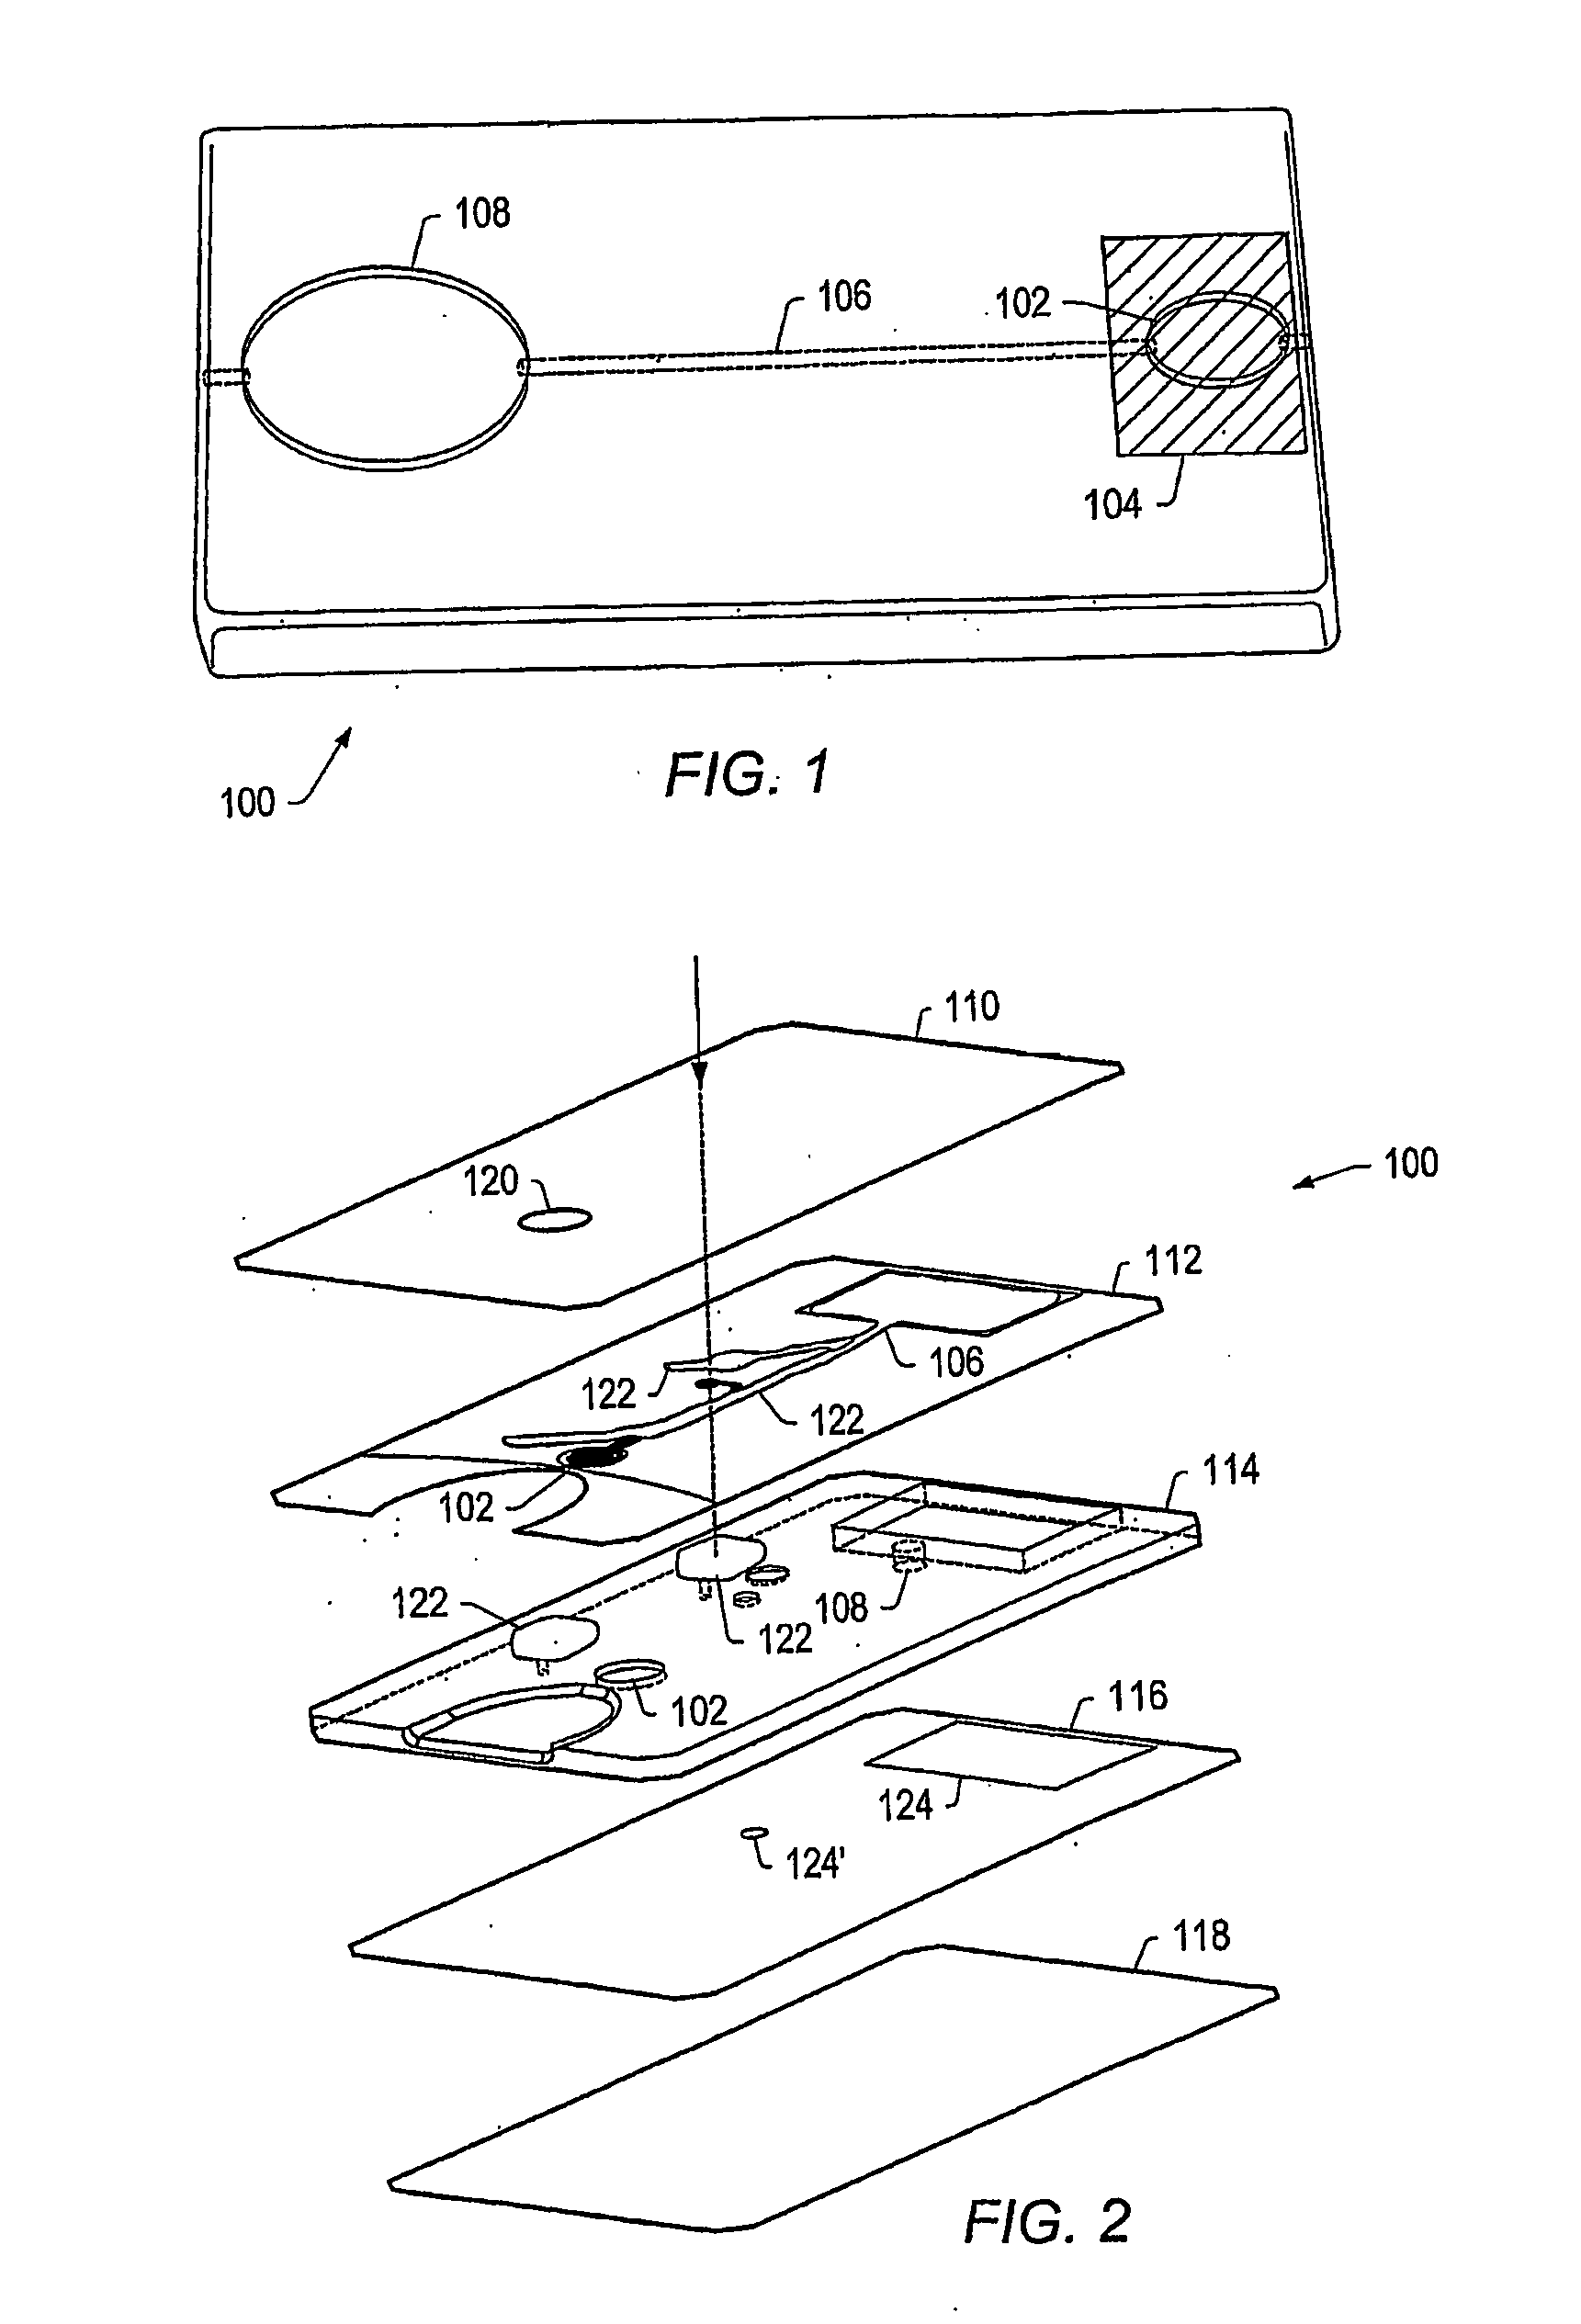 Systems and methods including self-contained cartridges with detection systems and fluid delivery systems